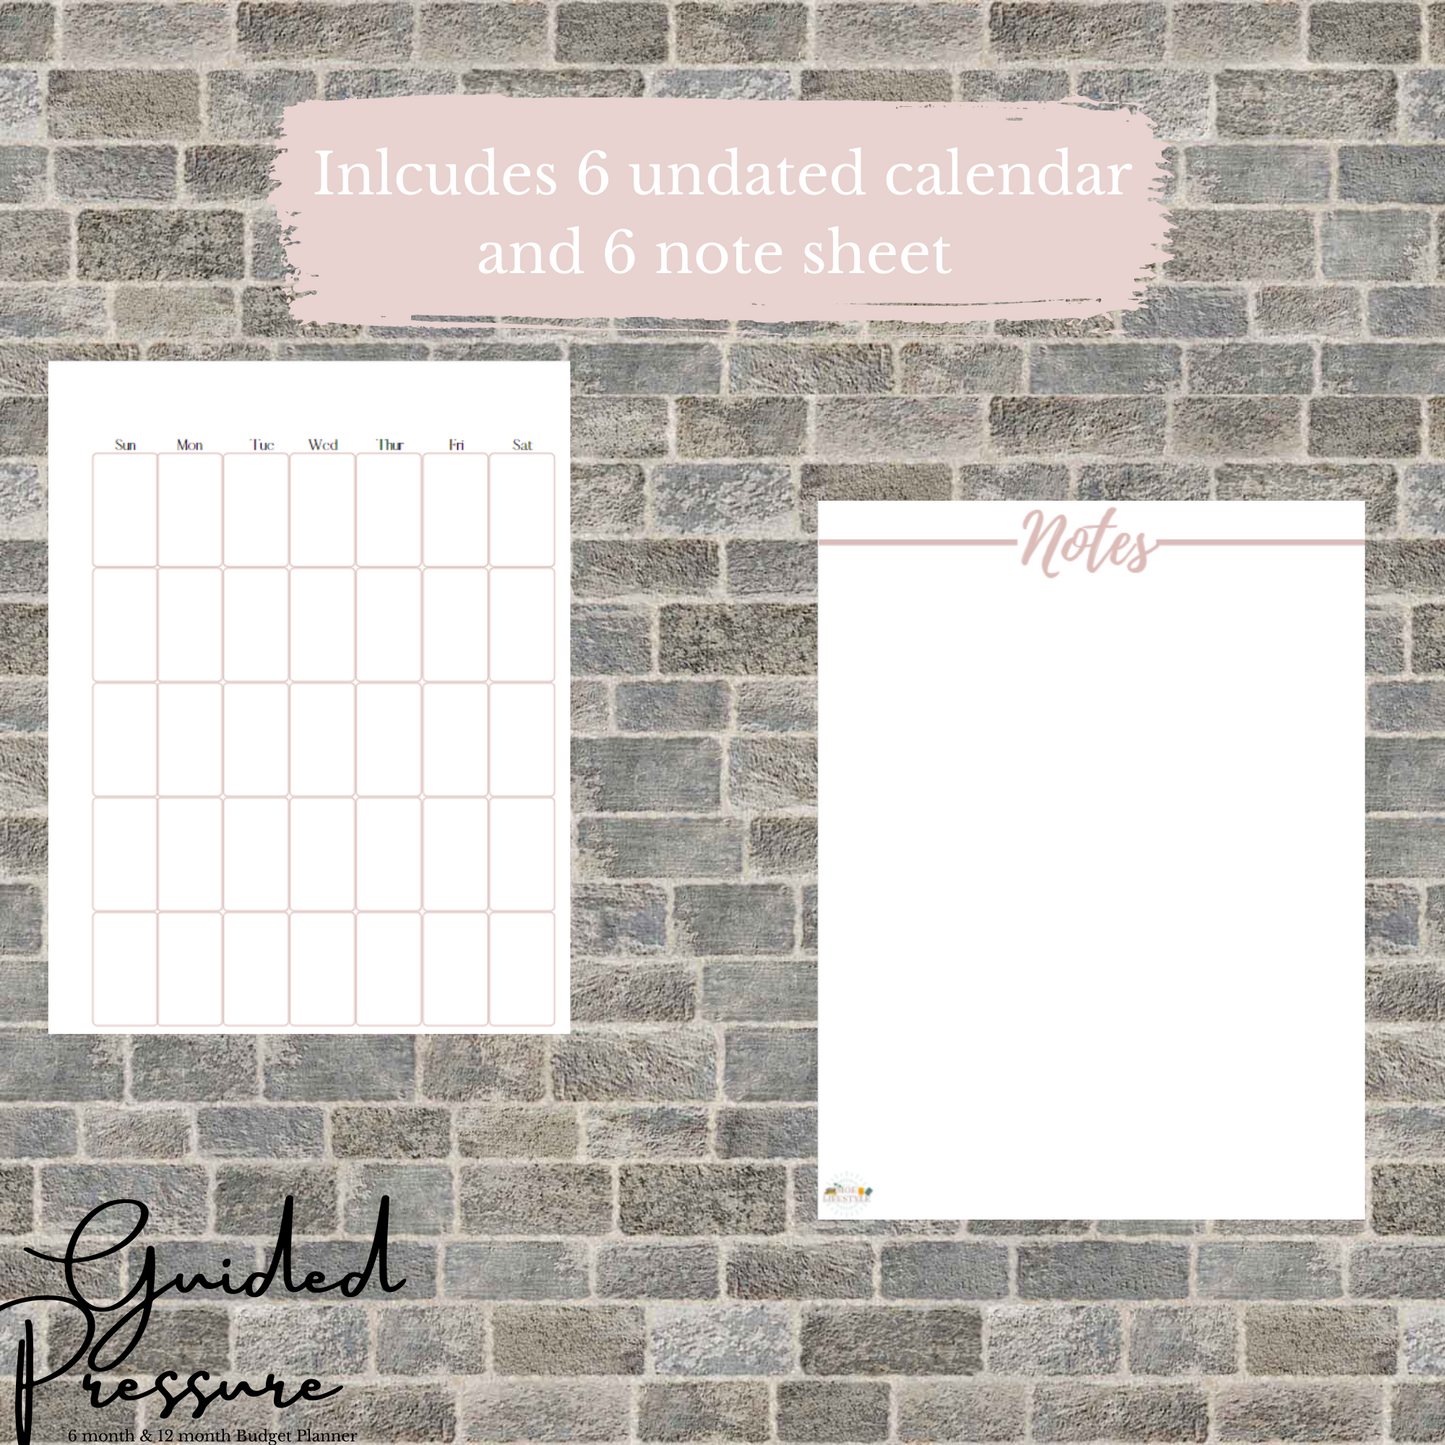 6 Month Pink Paycheck To Paycheck Digital Budget Planner Printable 8.5x11